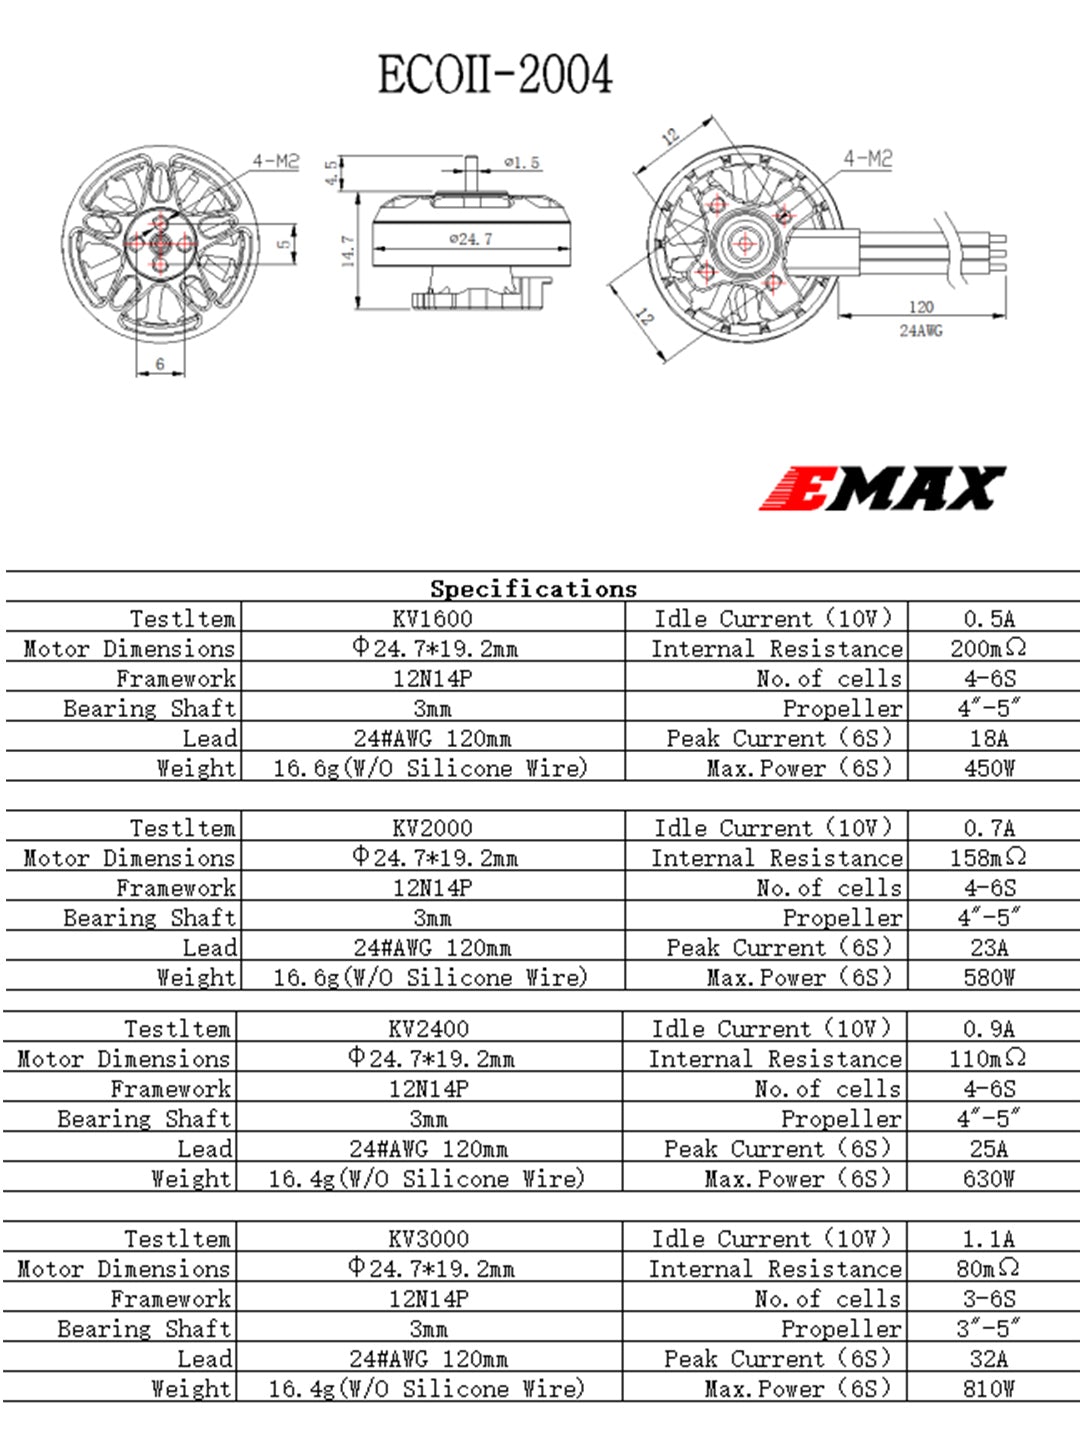 EMAX ECO II 2004 Brushless Motor Specifications